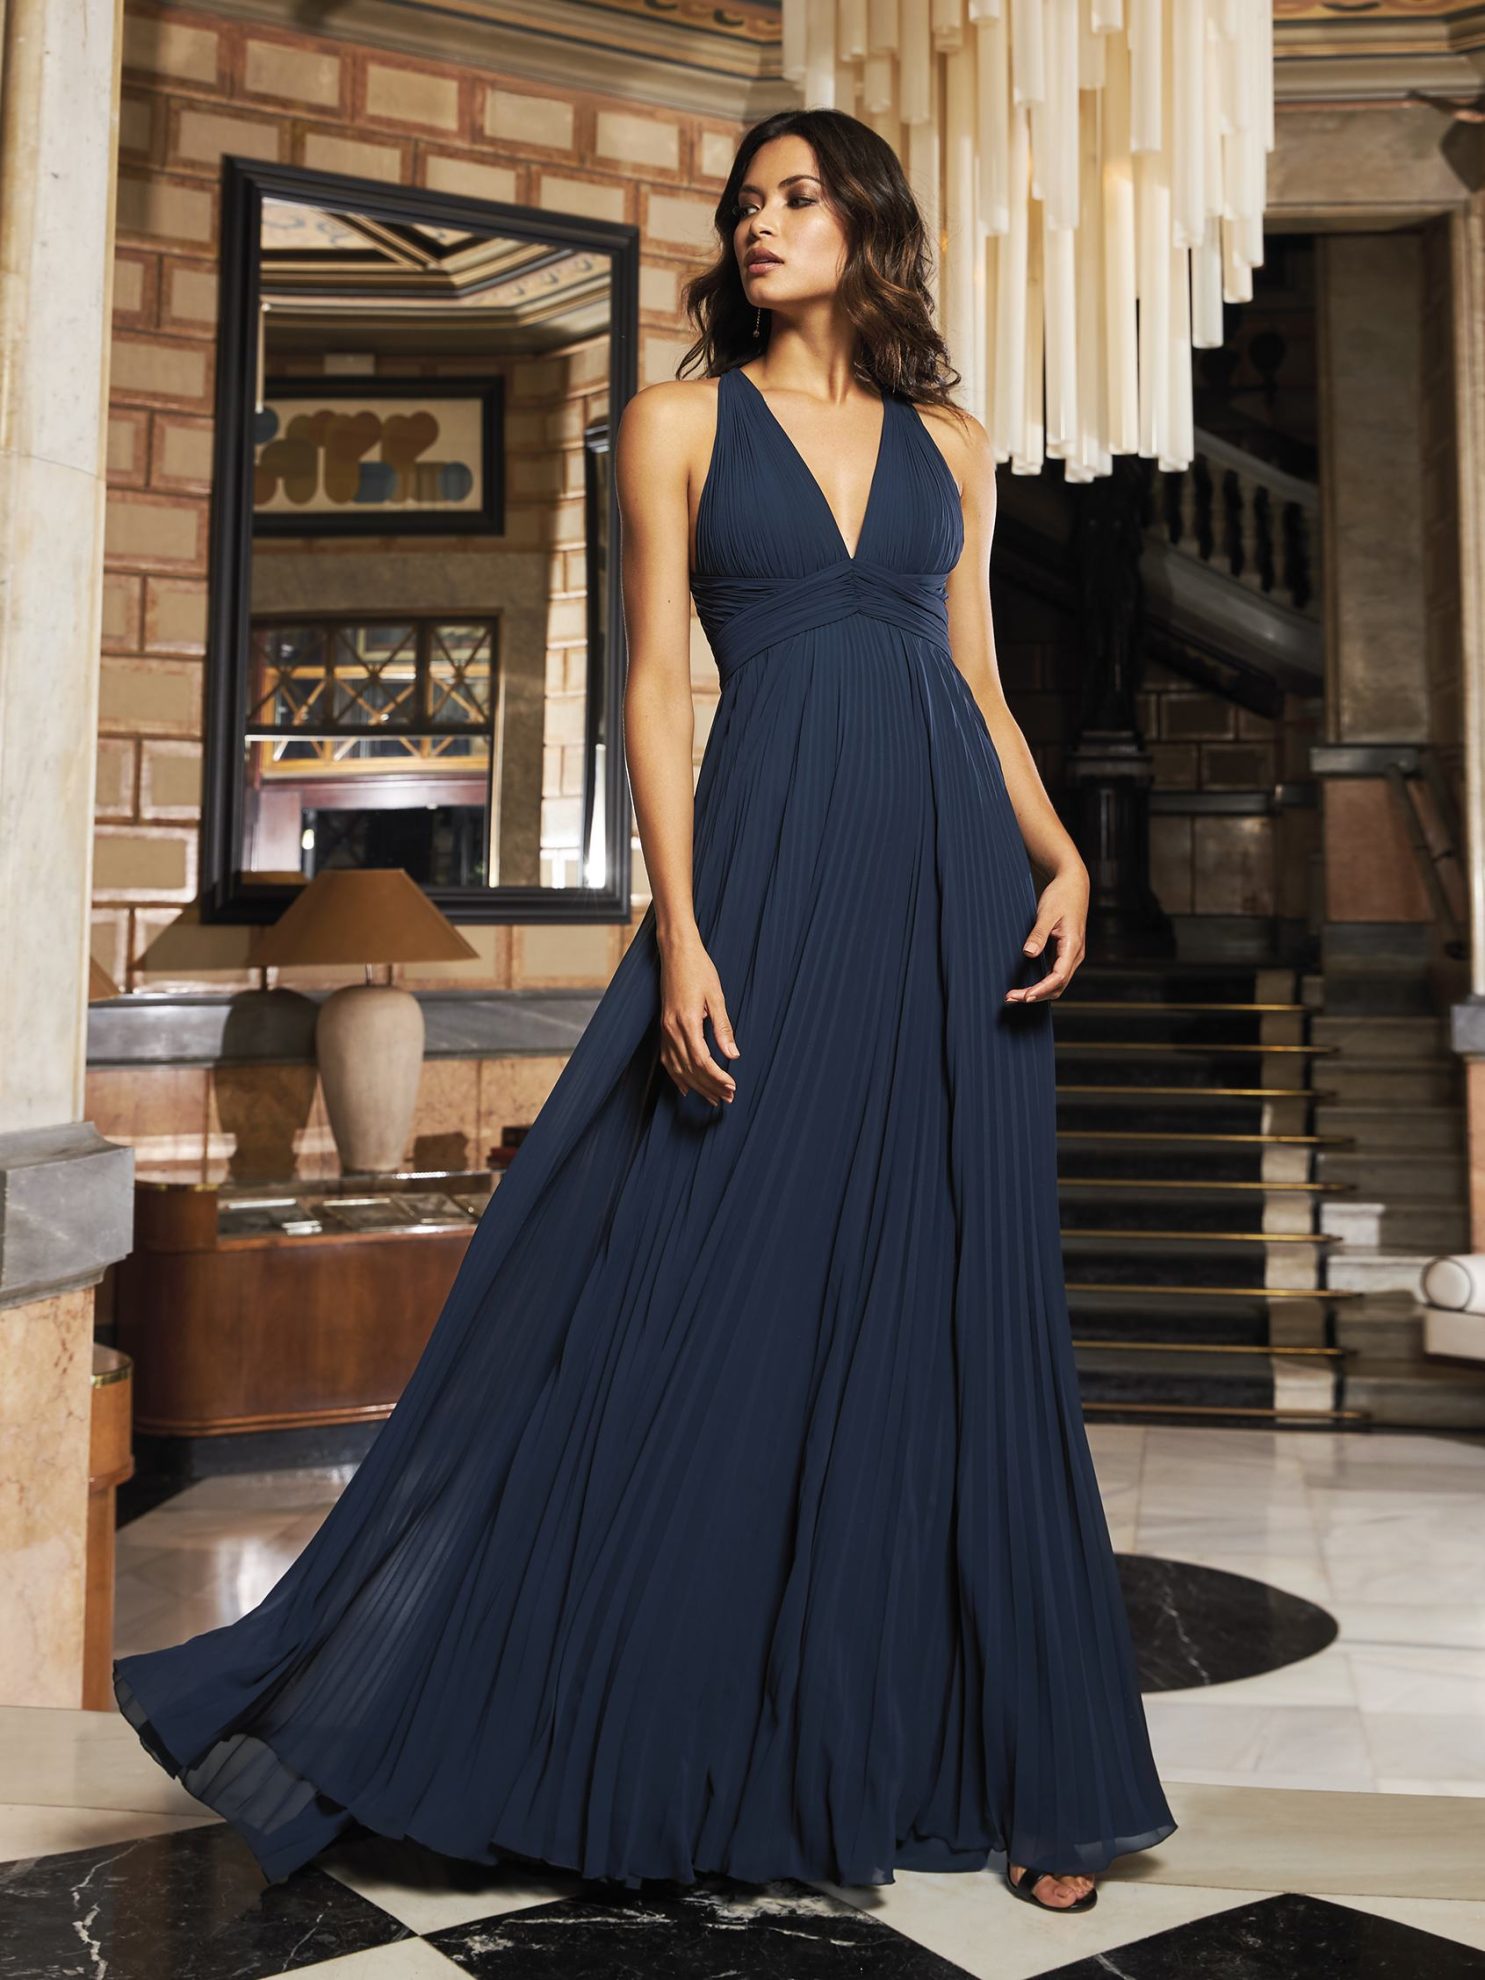 A navy bridesmaid dress from Pronovias. Image used in the 8 Unique Something Blue Ideas For Your Wedding Day article.